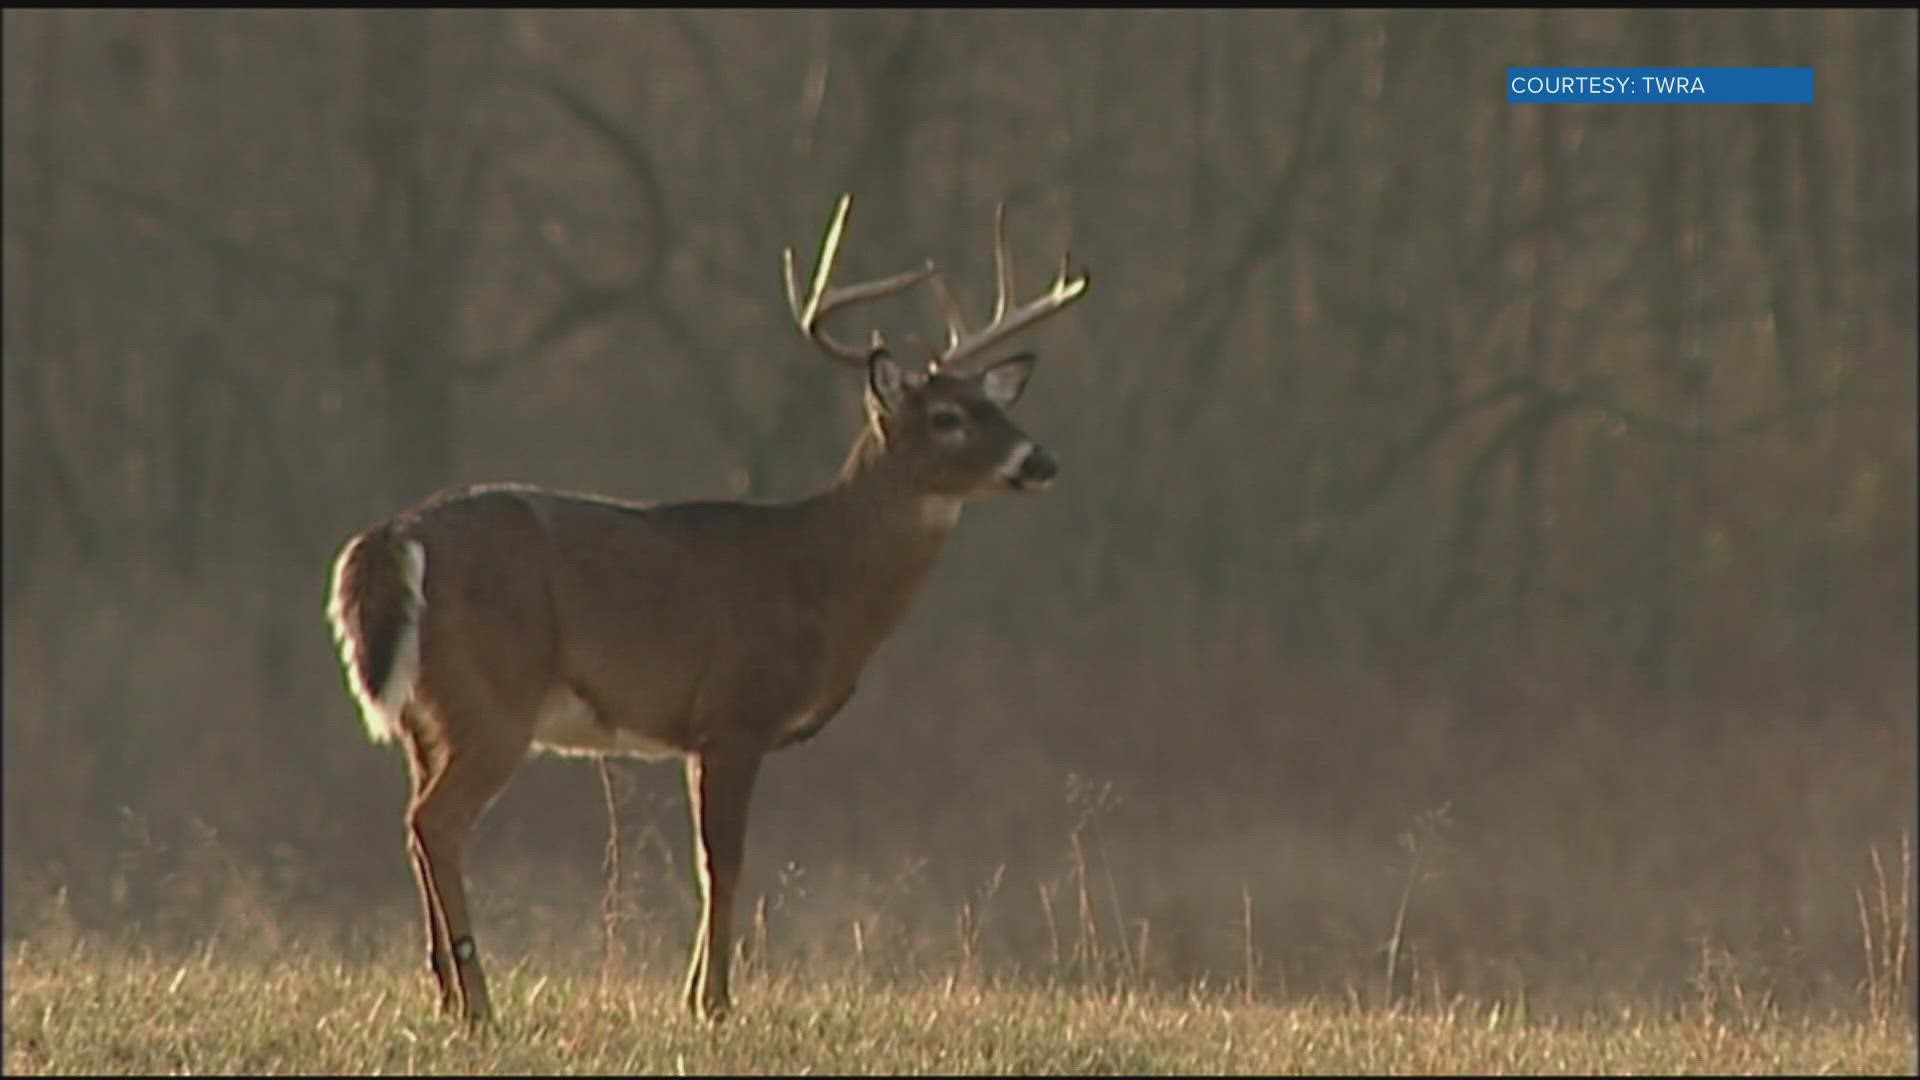 The Tennessee Wildlife Resources Agency said ever since CWD was confirmed in the state in 2018, they have been working to communicate information about it.